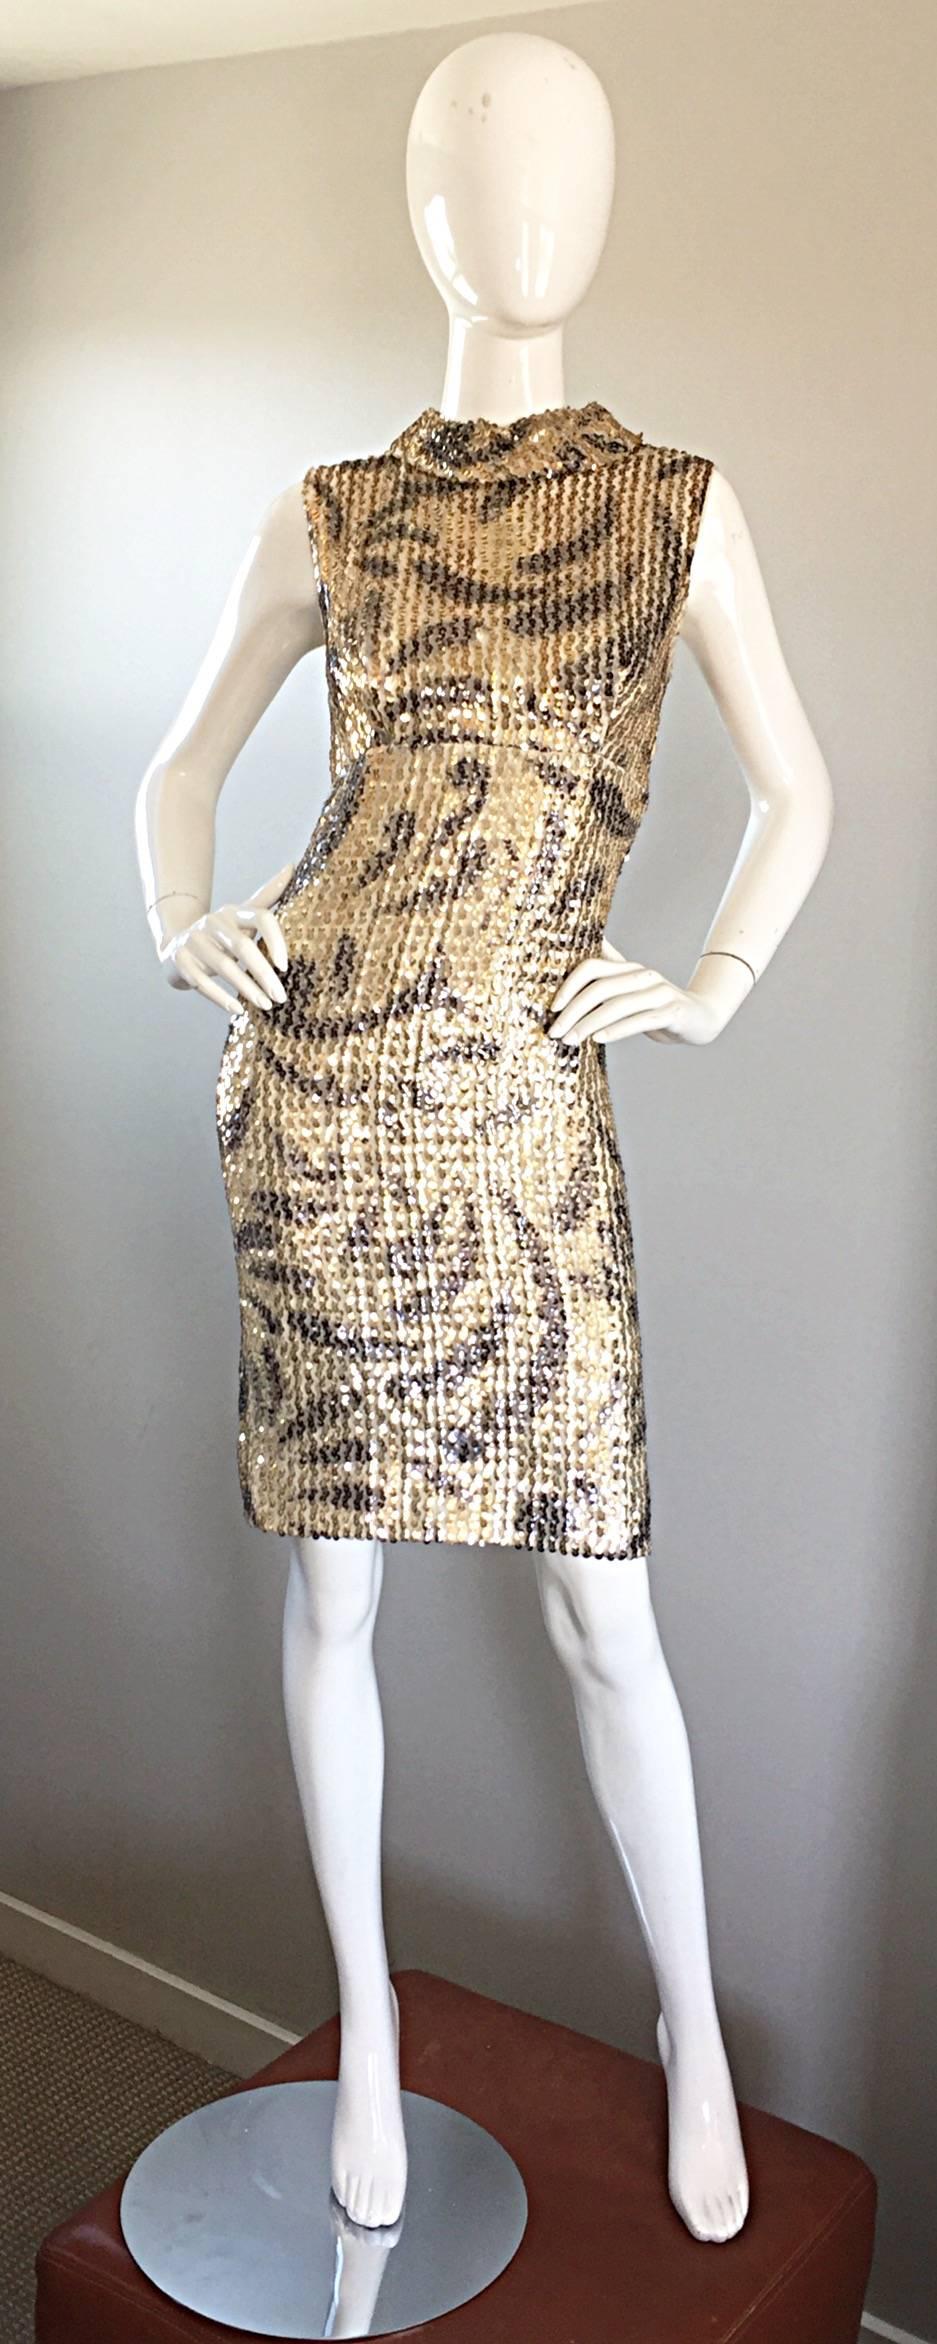 Fantastic vintage 1960s ELINOR GAY gold and black sequined silk wiggle shift dress! A unique technique using some sort of paint and stencils were used in the creation of this insanely gorgeous hand painted dress! Thousands of hand-sewn gold sequins